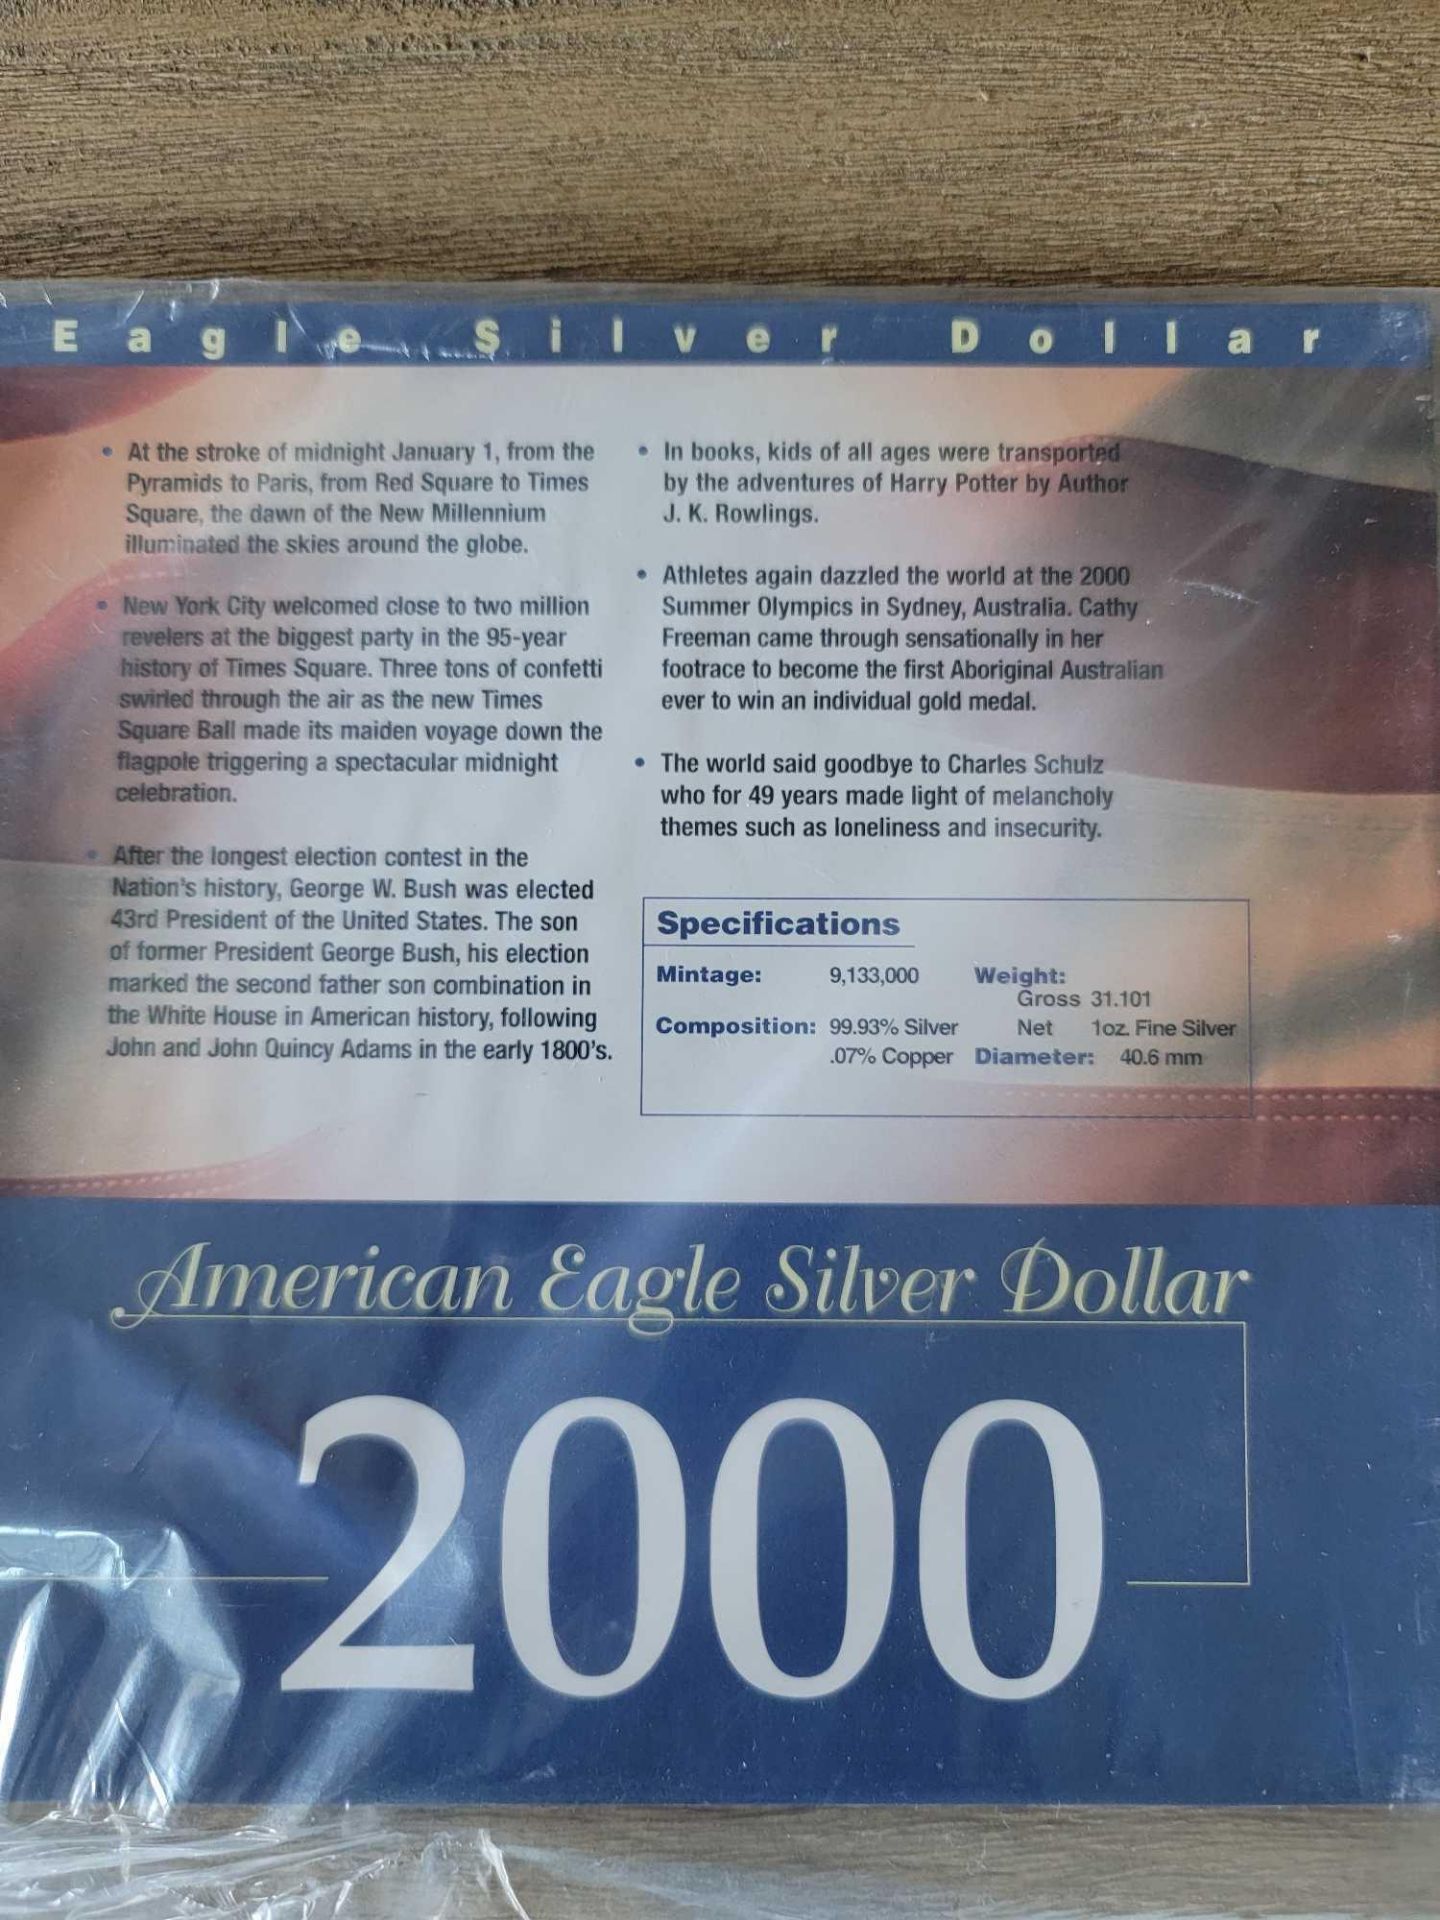 2000 Colored Silver Eagle with Sleeve of Facts - Image 6 of 8